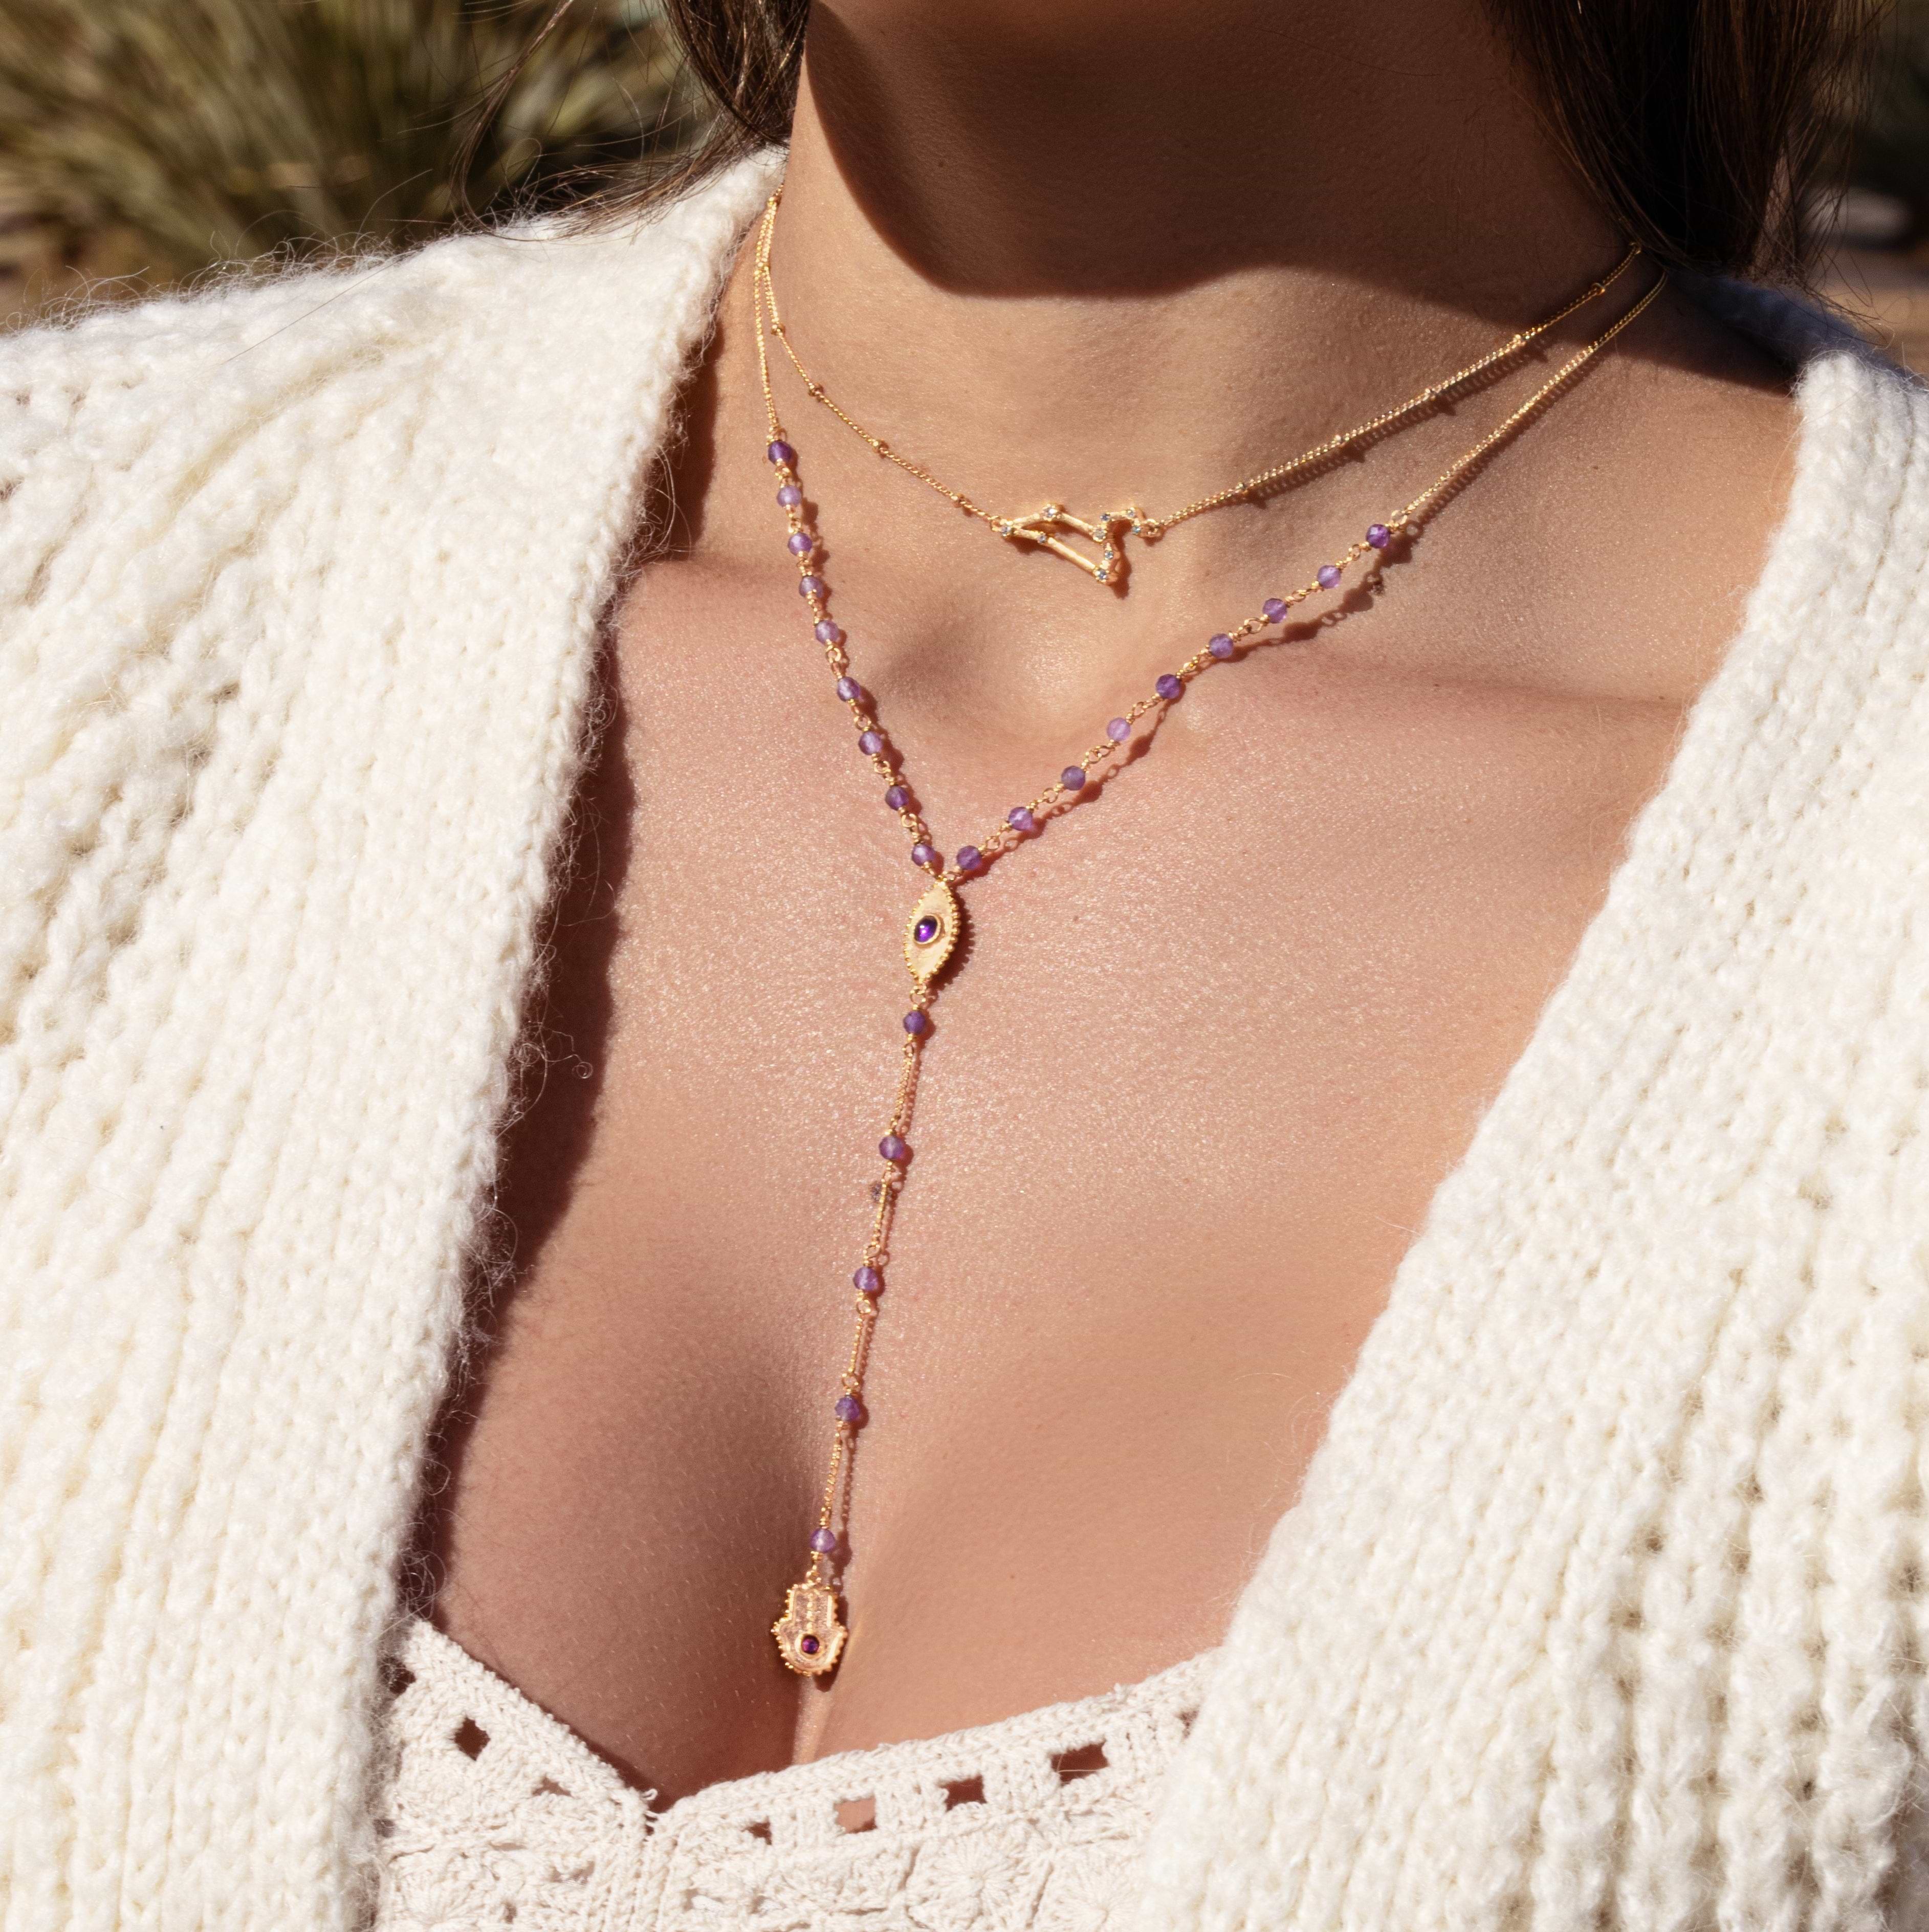 Karma and Luck  Necklace  -  Peace of Spirit - Amethyst Evil Eye Hamsa Lariat Necklace